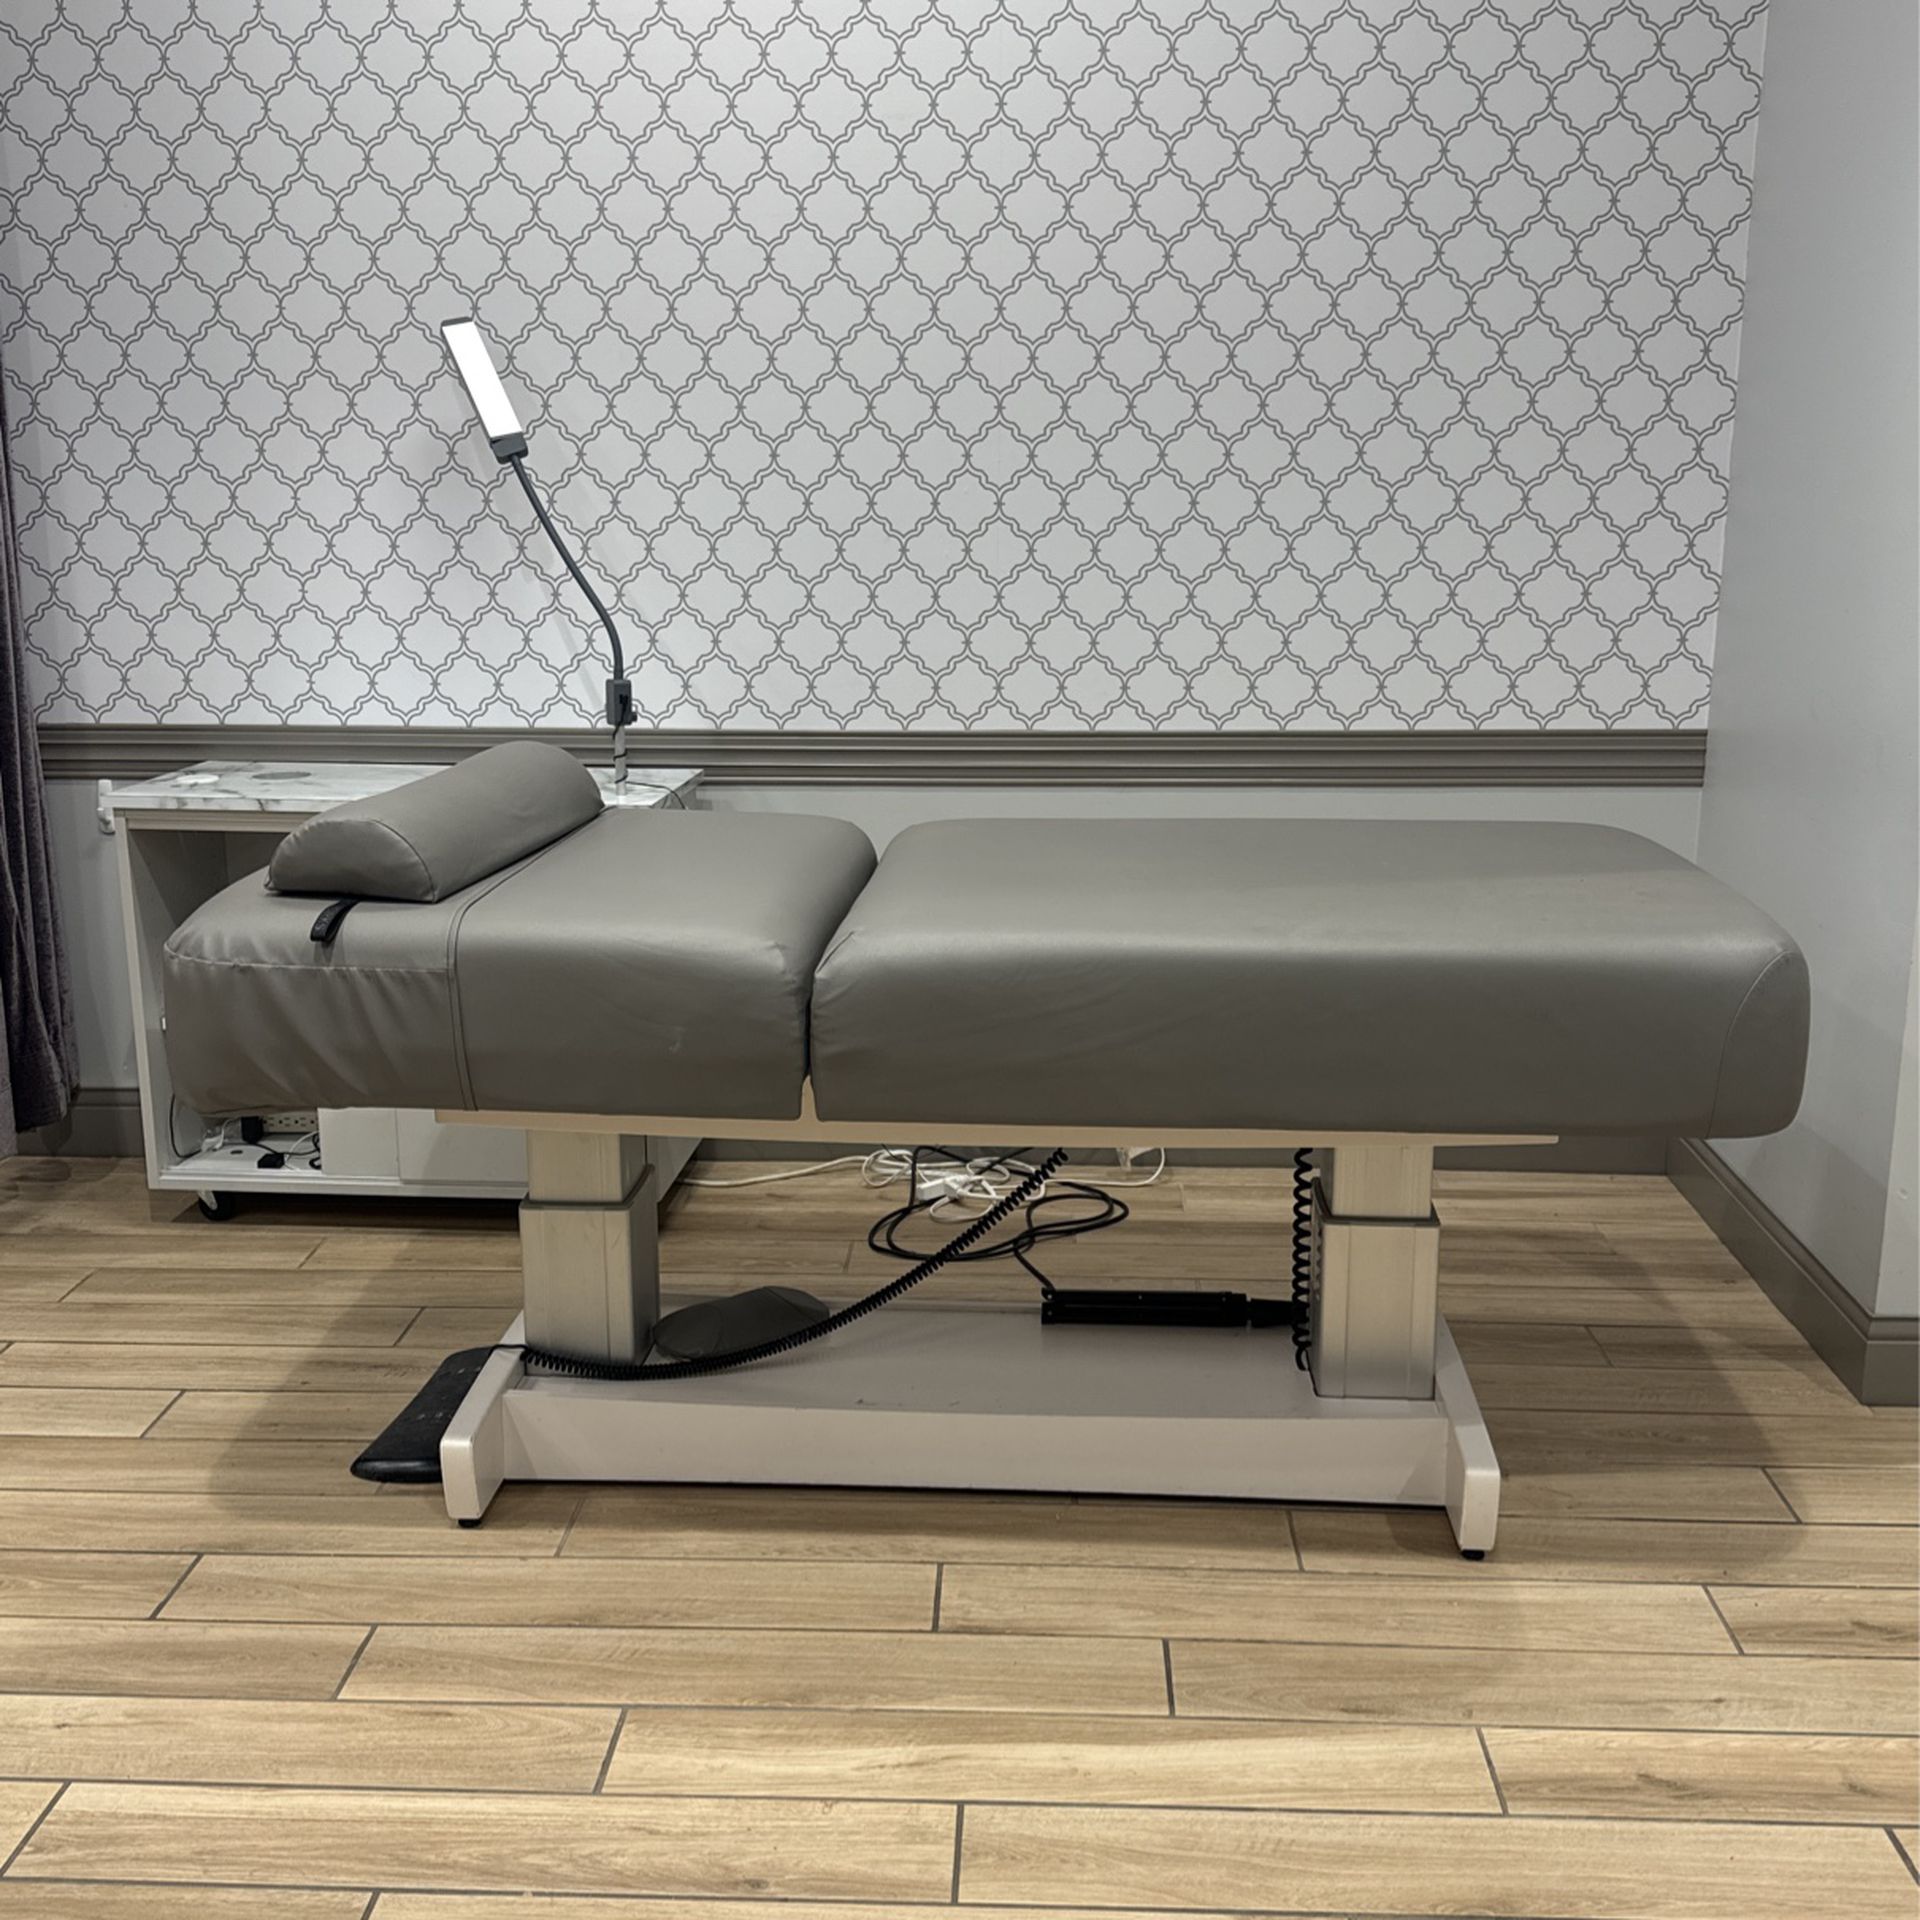 Spa Beds For Any Services- Heavy Duty